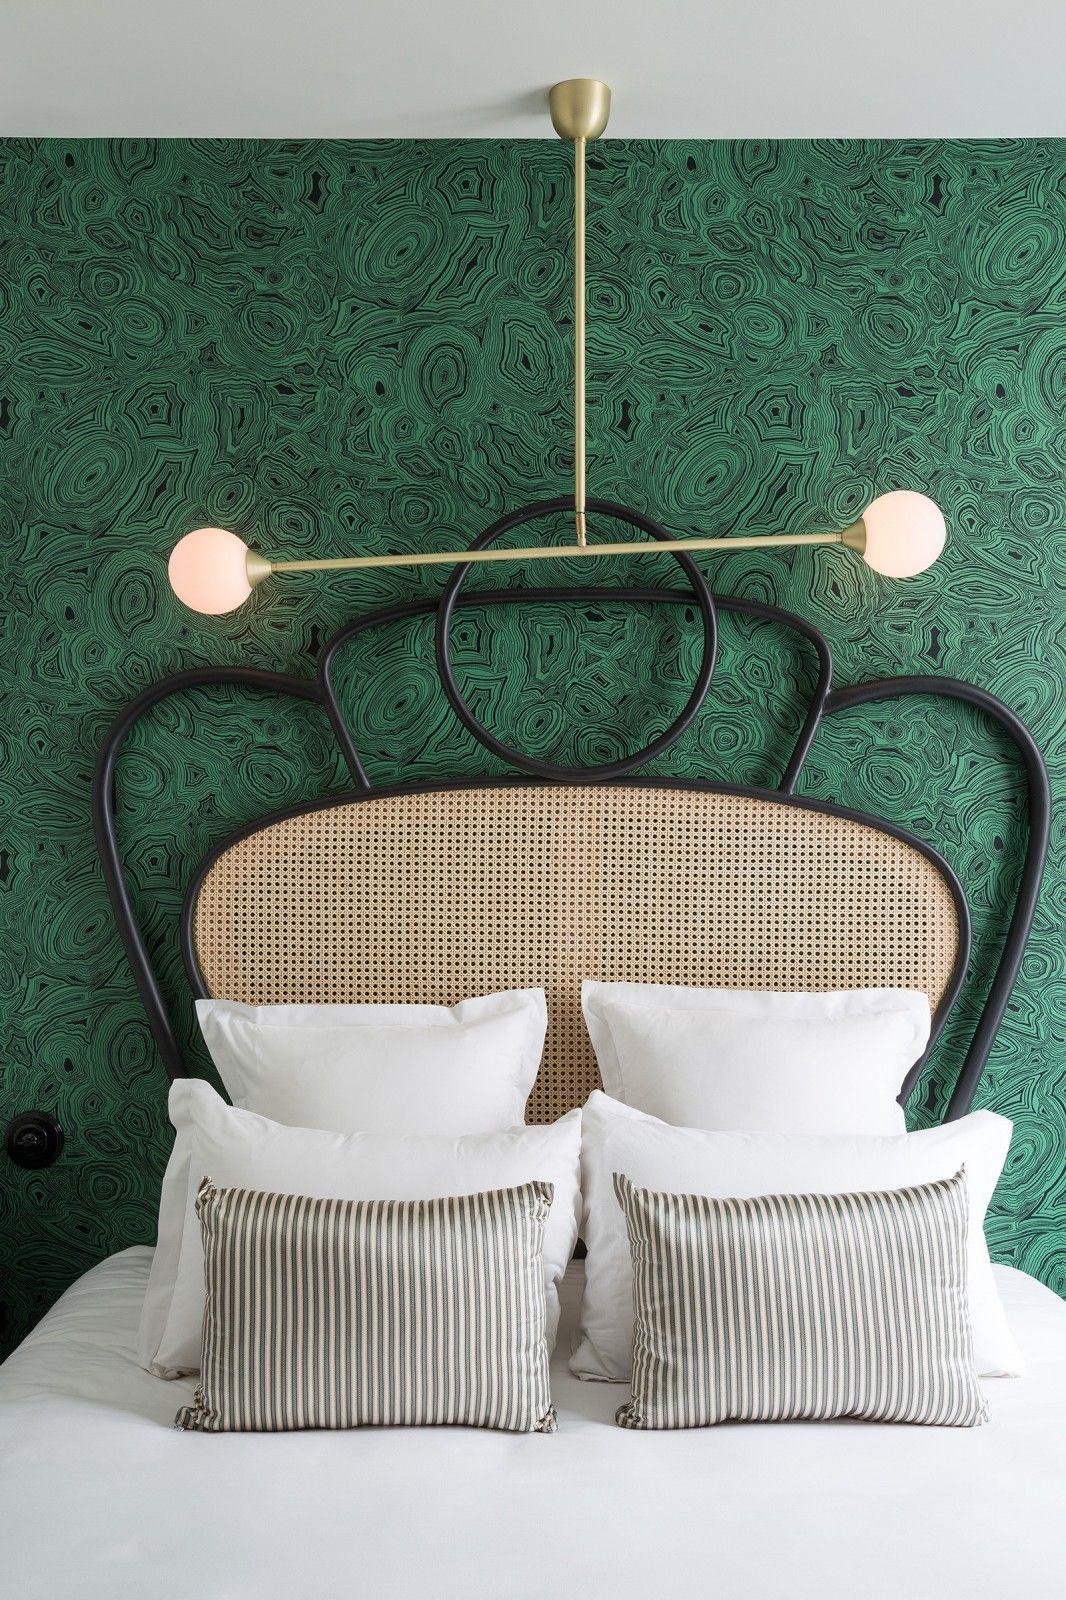 malachite wallpaper and cane bed at the hotel Panache in Paris | statement headboard roundup on coco kelley